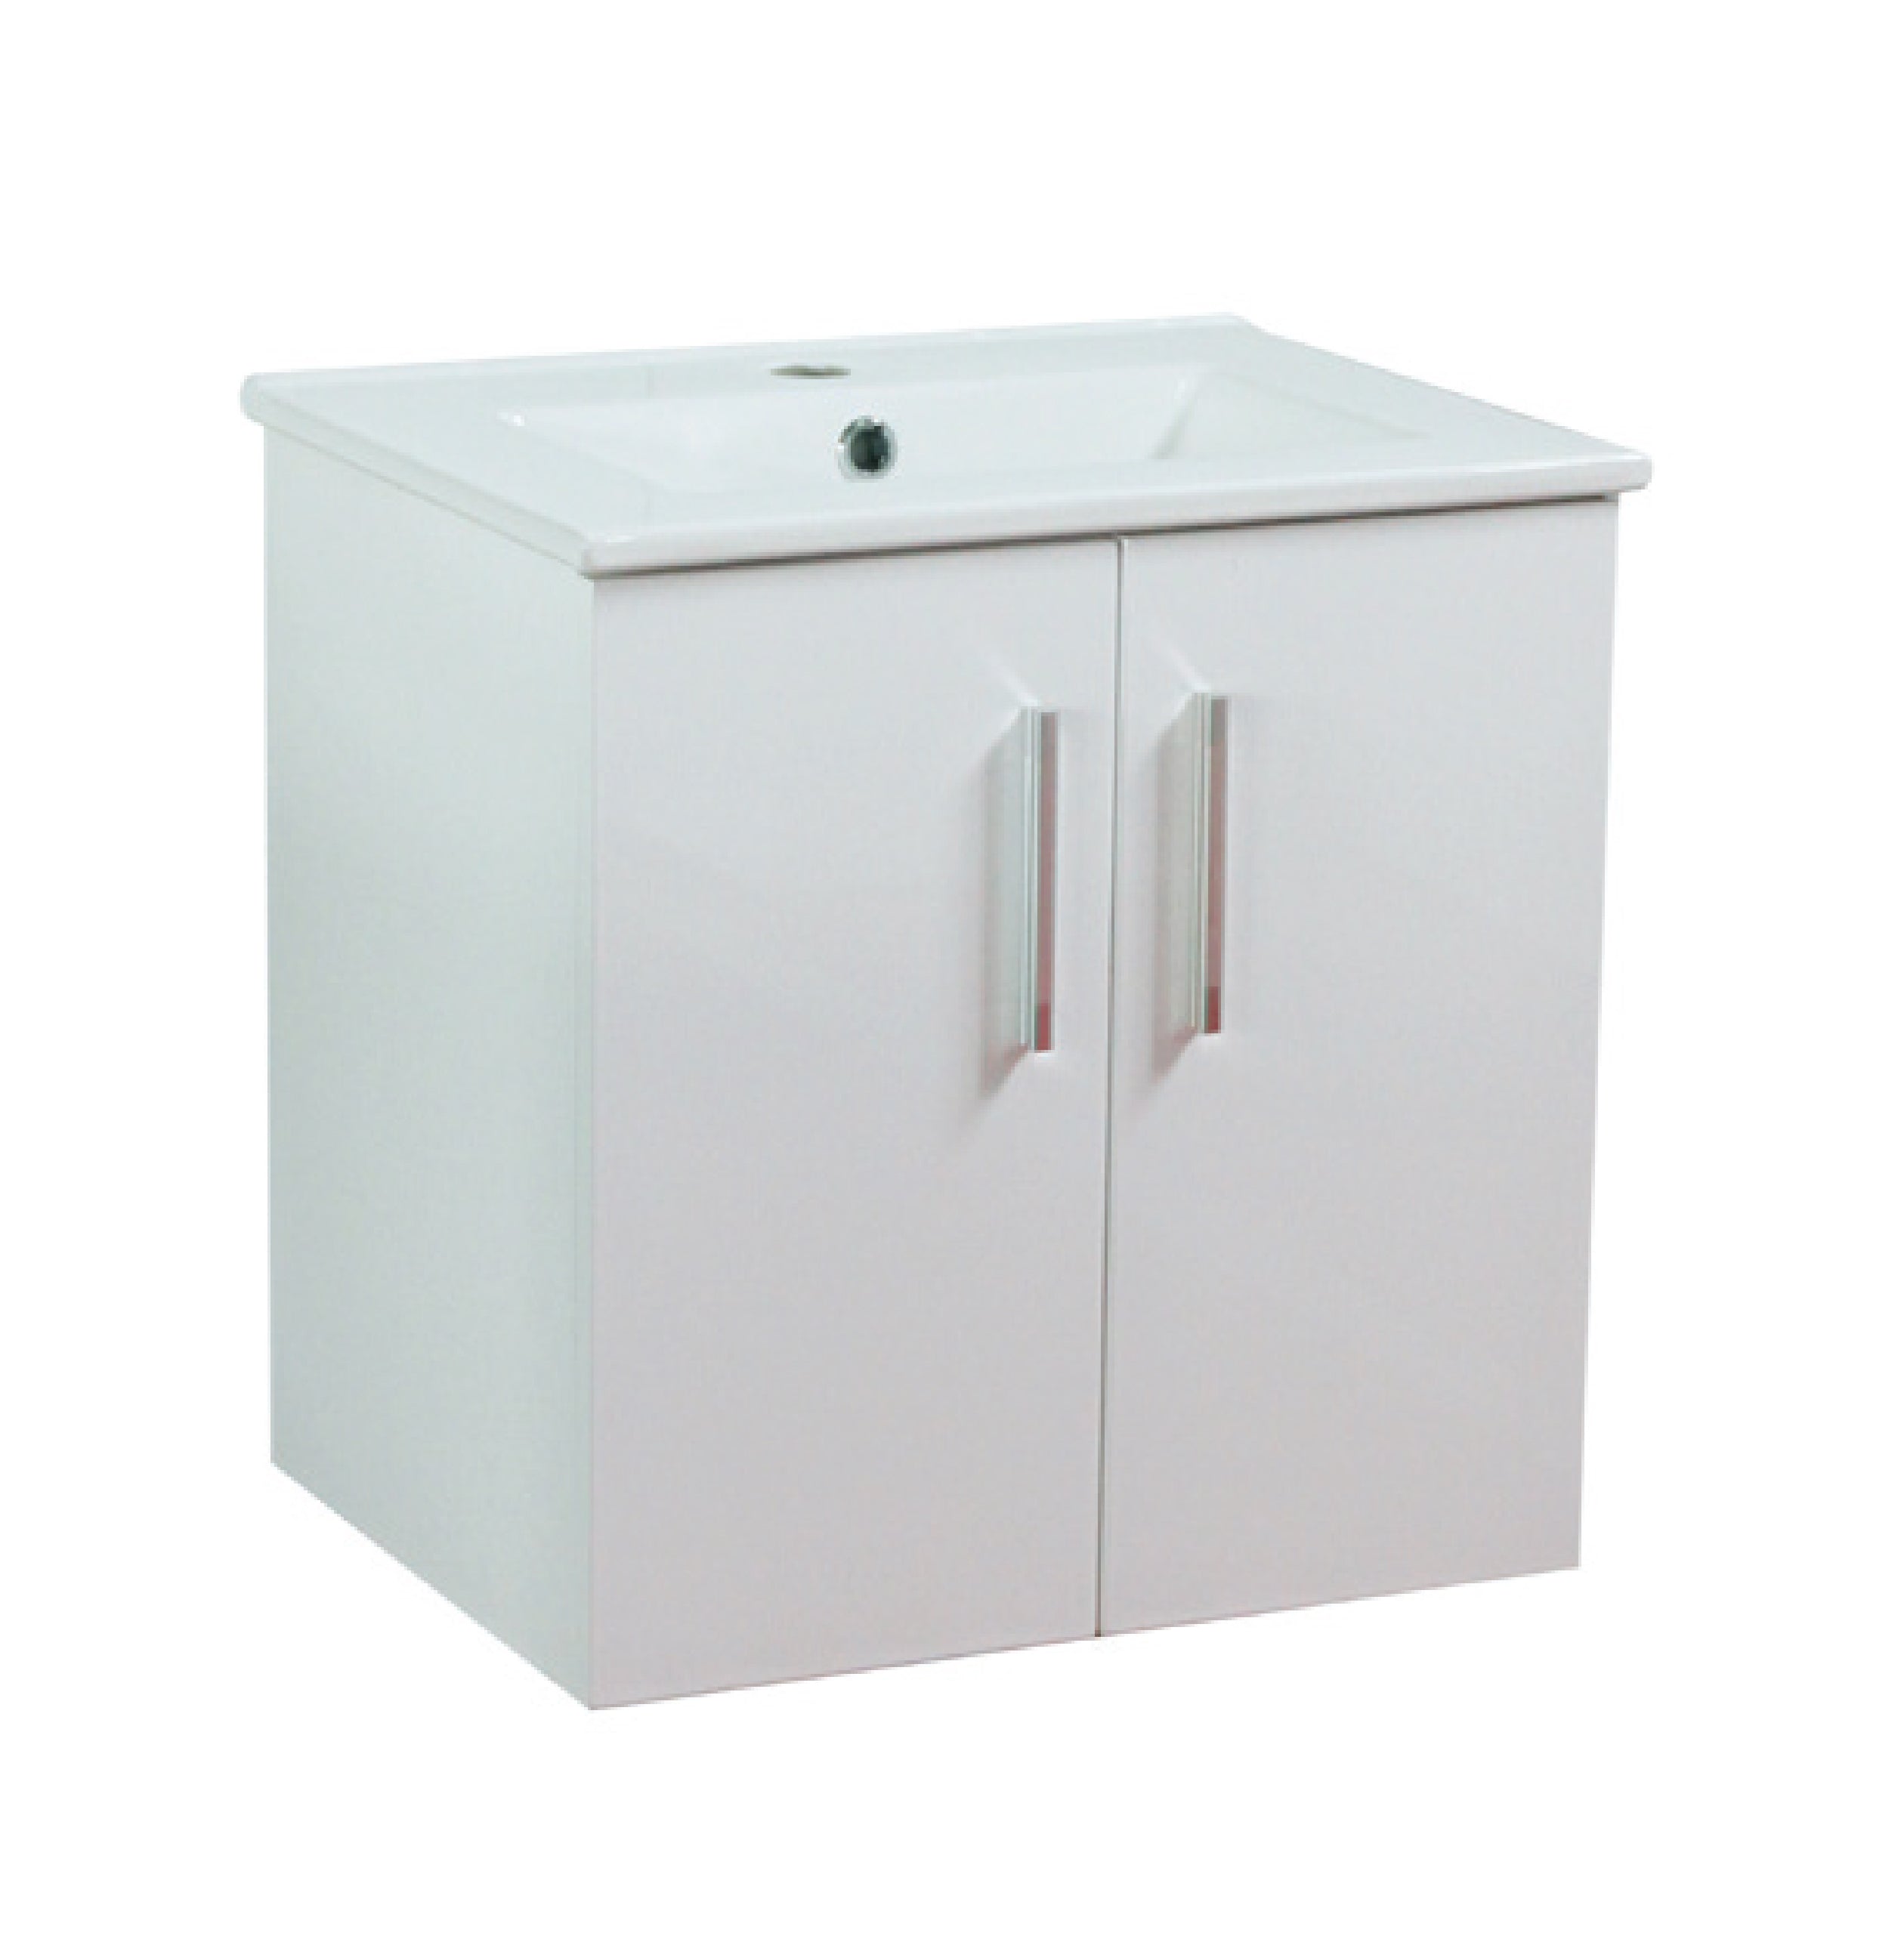 Flair Wall Hung Bathroom Vanity Units with Basin in Luxurious White Finish and Chrome Handles 